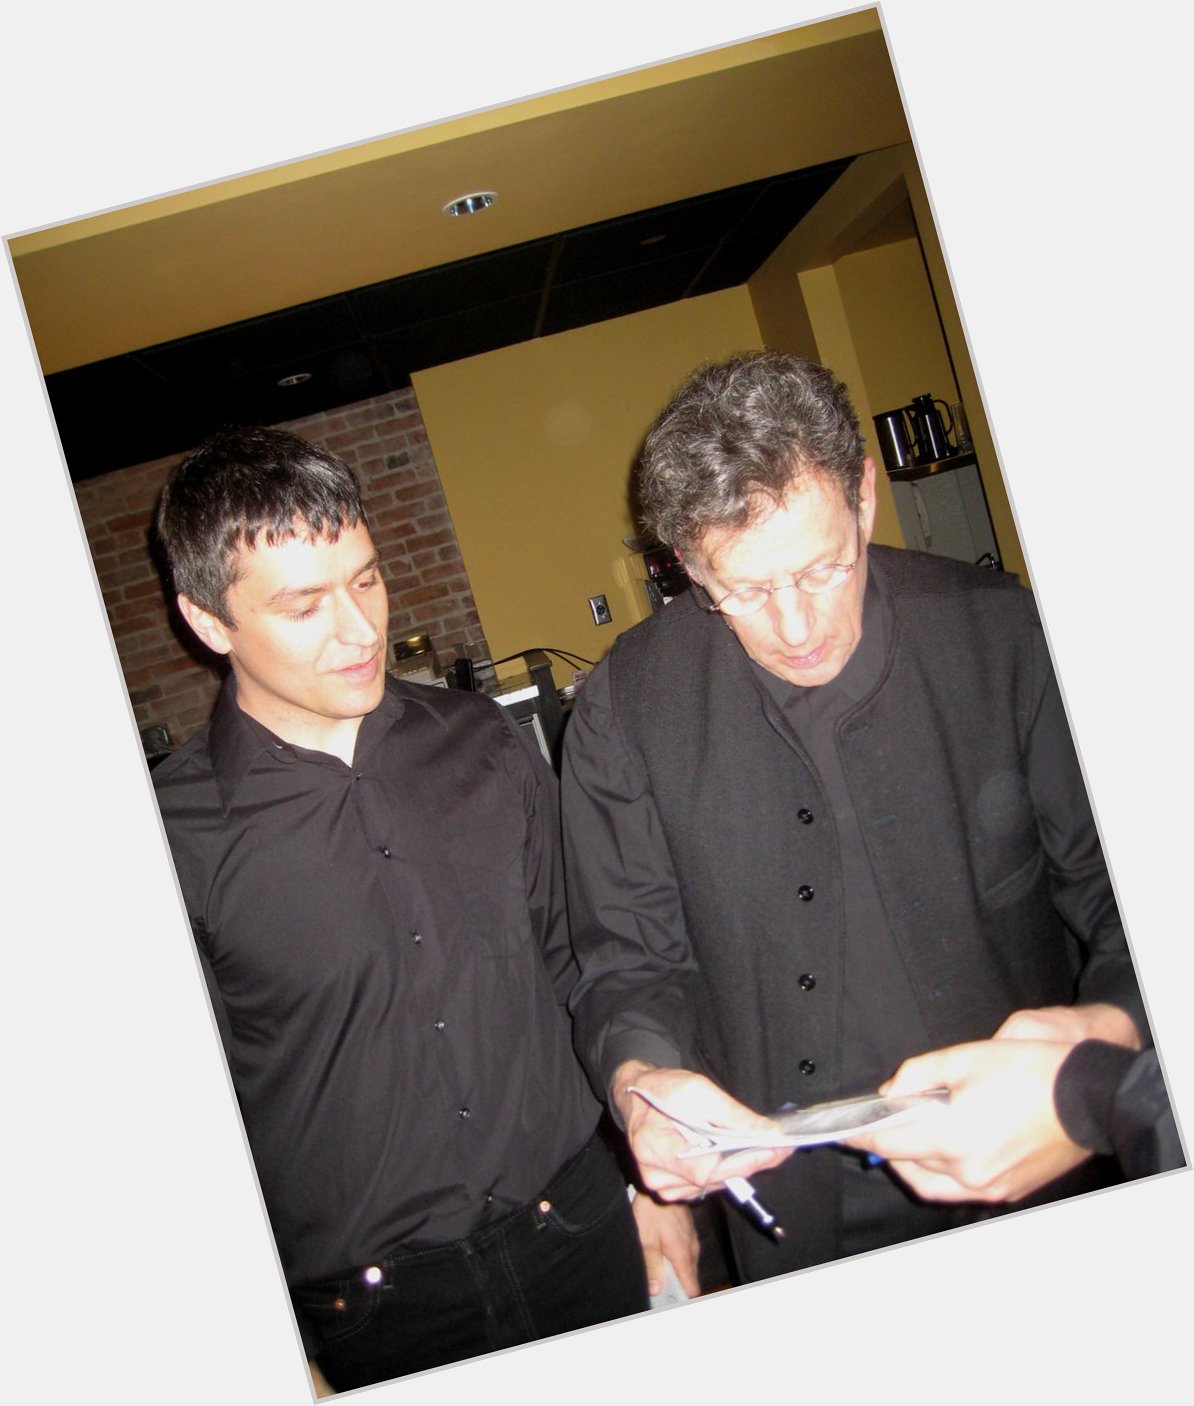 Happy 80th birthday Philip Glass.
So to stand awkward AF next to you in 2009. 